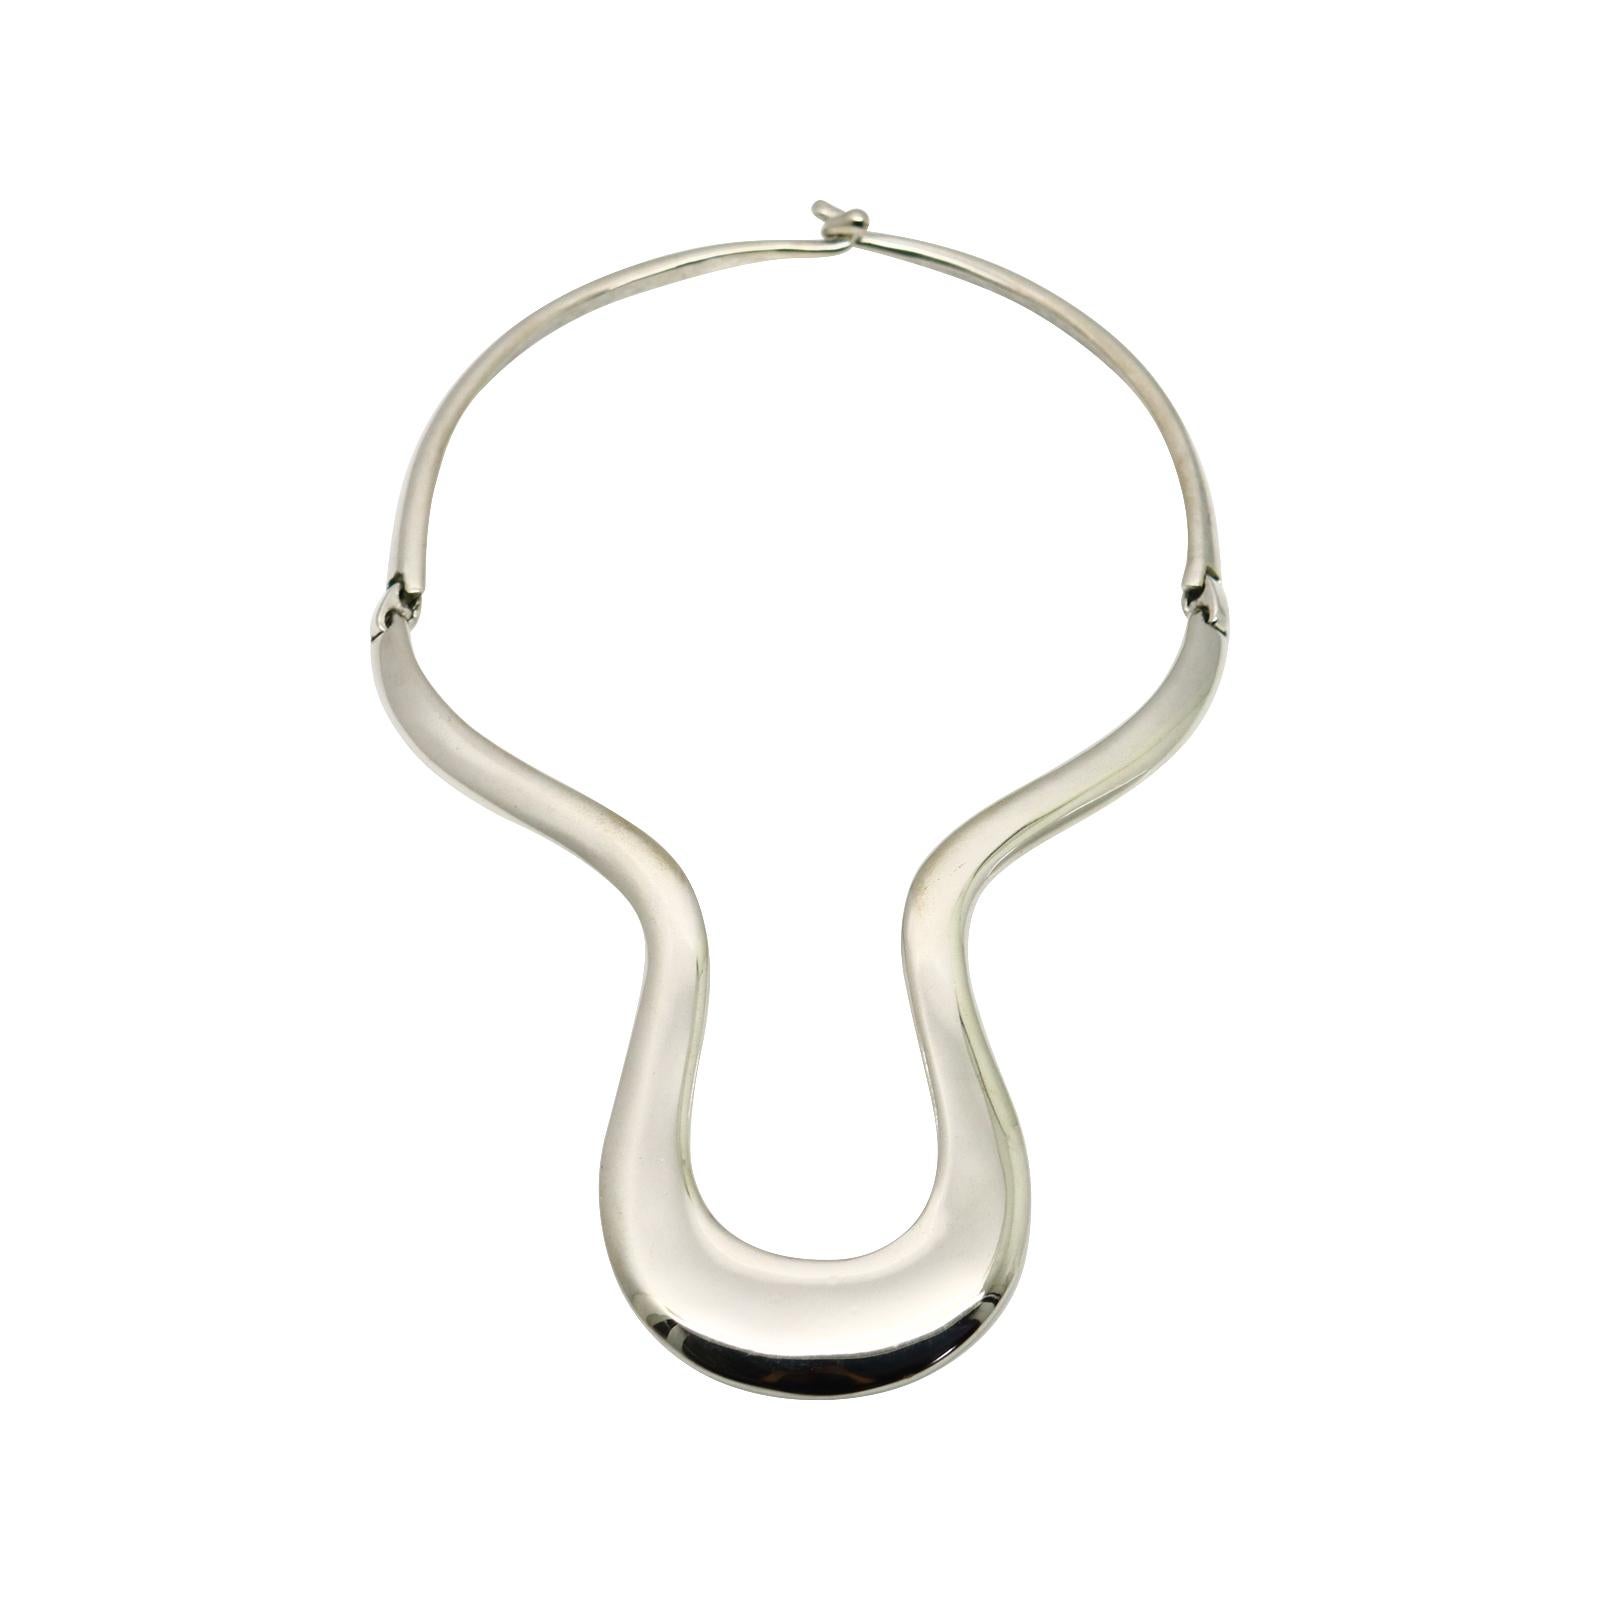 Modern Vintage Alexis Kirk Articulated Silver Tone Choker Necklace Circa 1980s For Sale